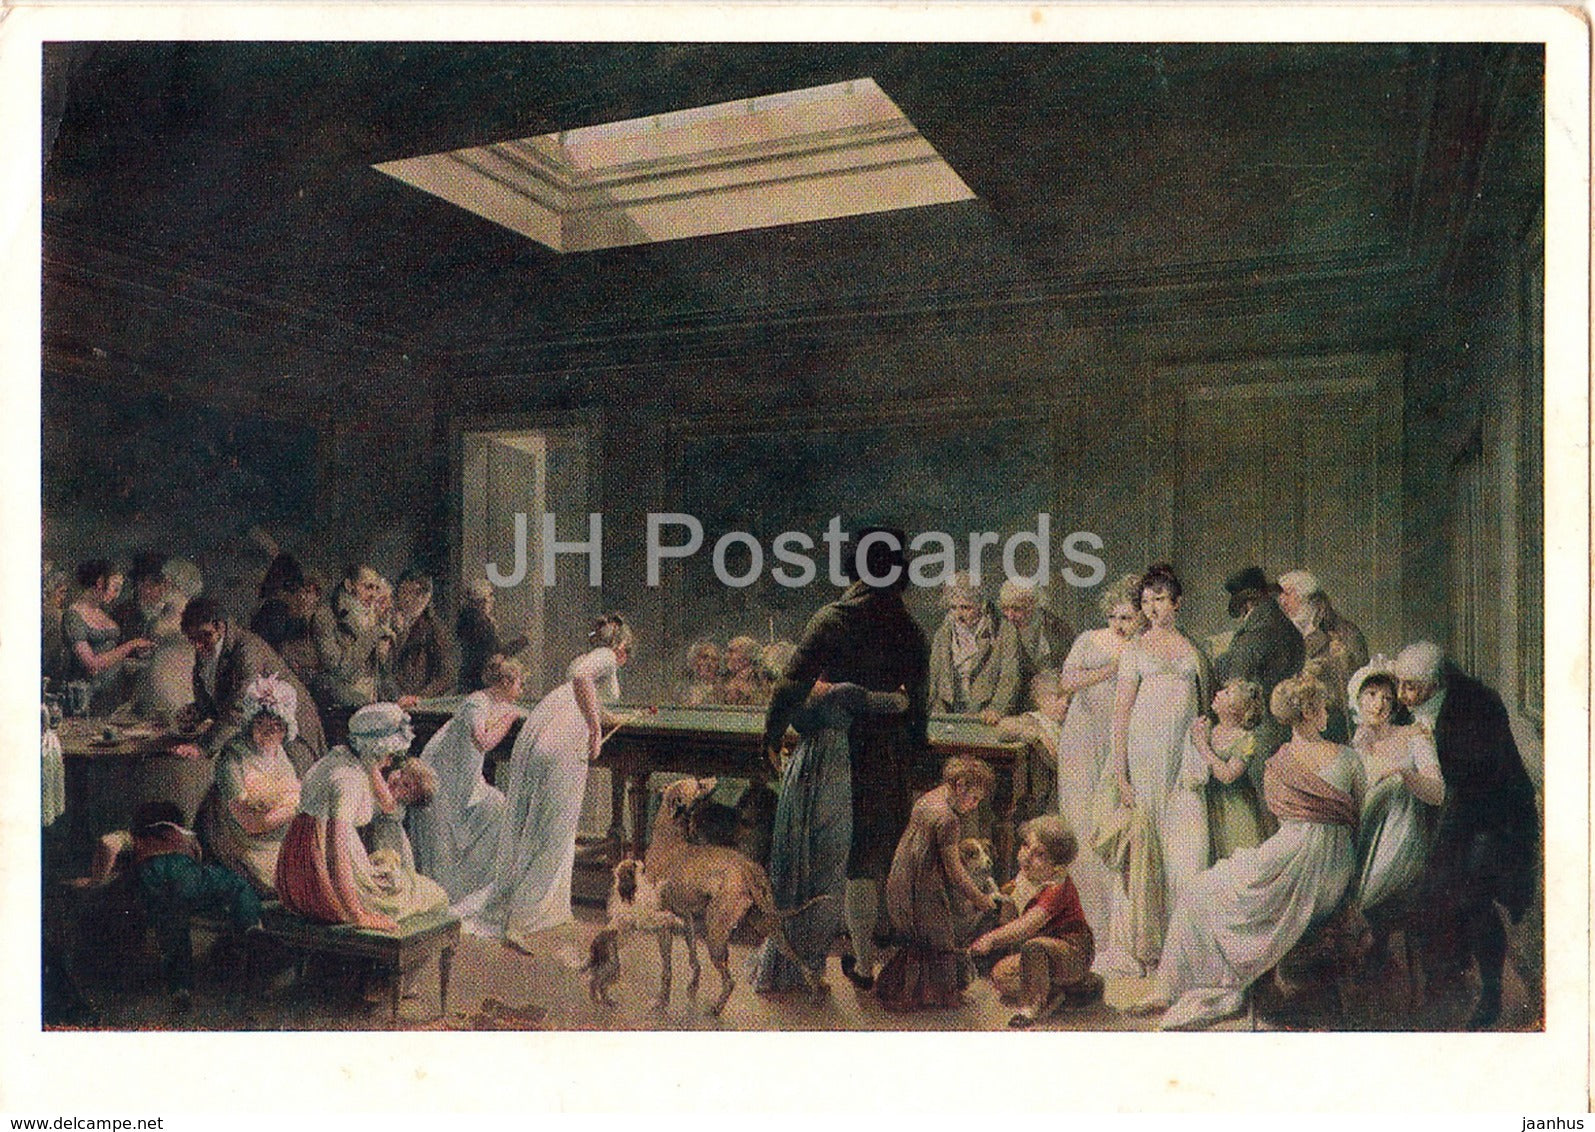 painting by Louis-Leopold Boilly - Billiards - French art - 1962 - Russia USSR - unused - JH Postcards